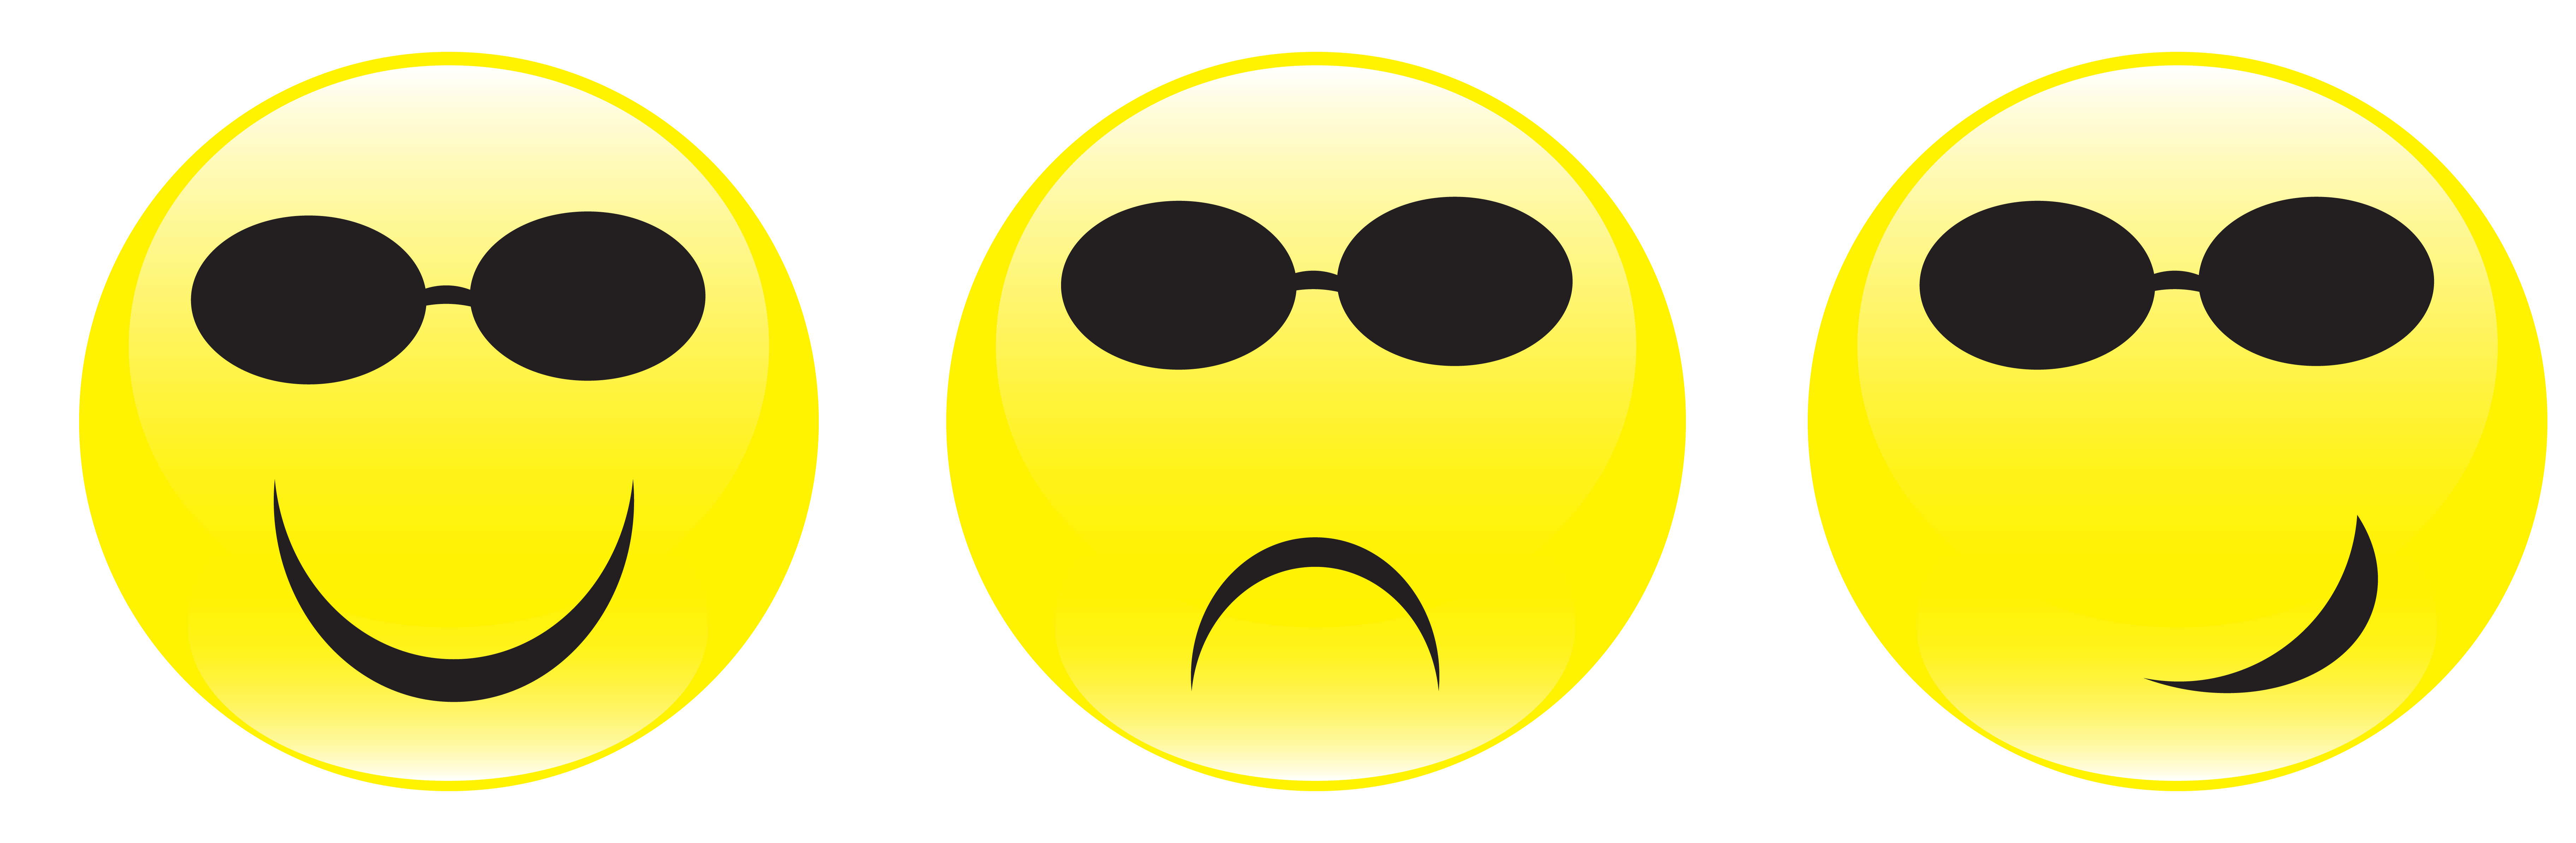 Happy Face Sad Face - Clipart library